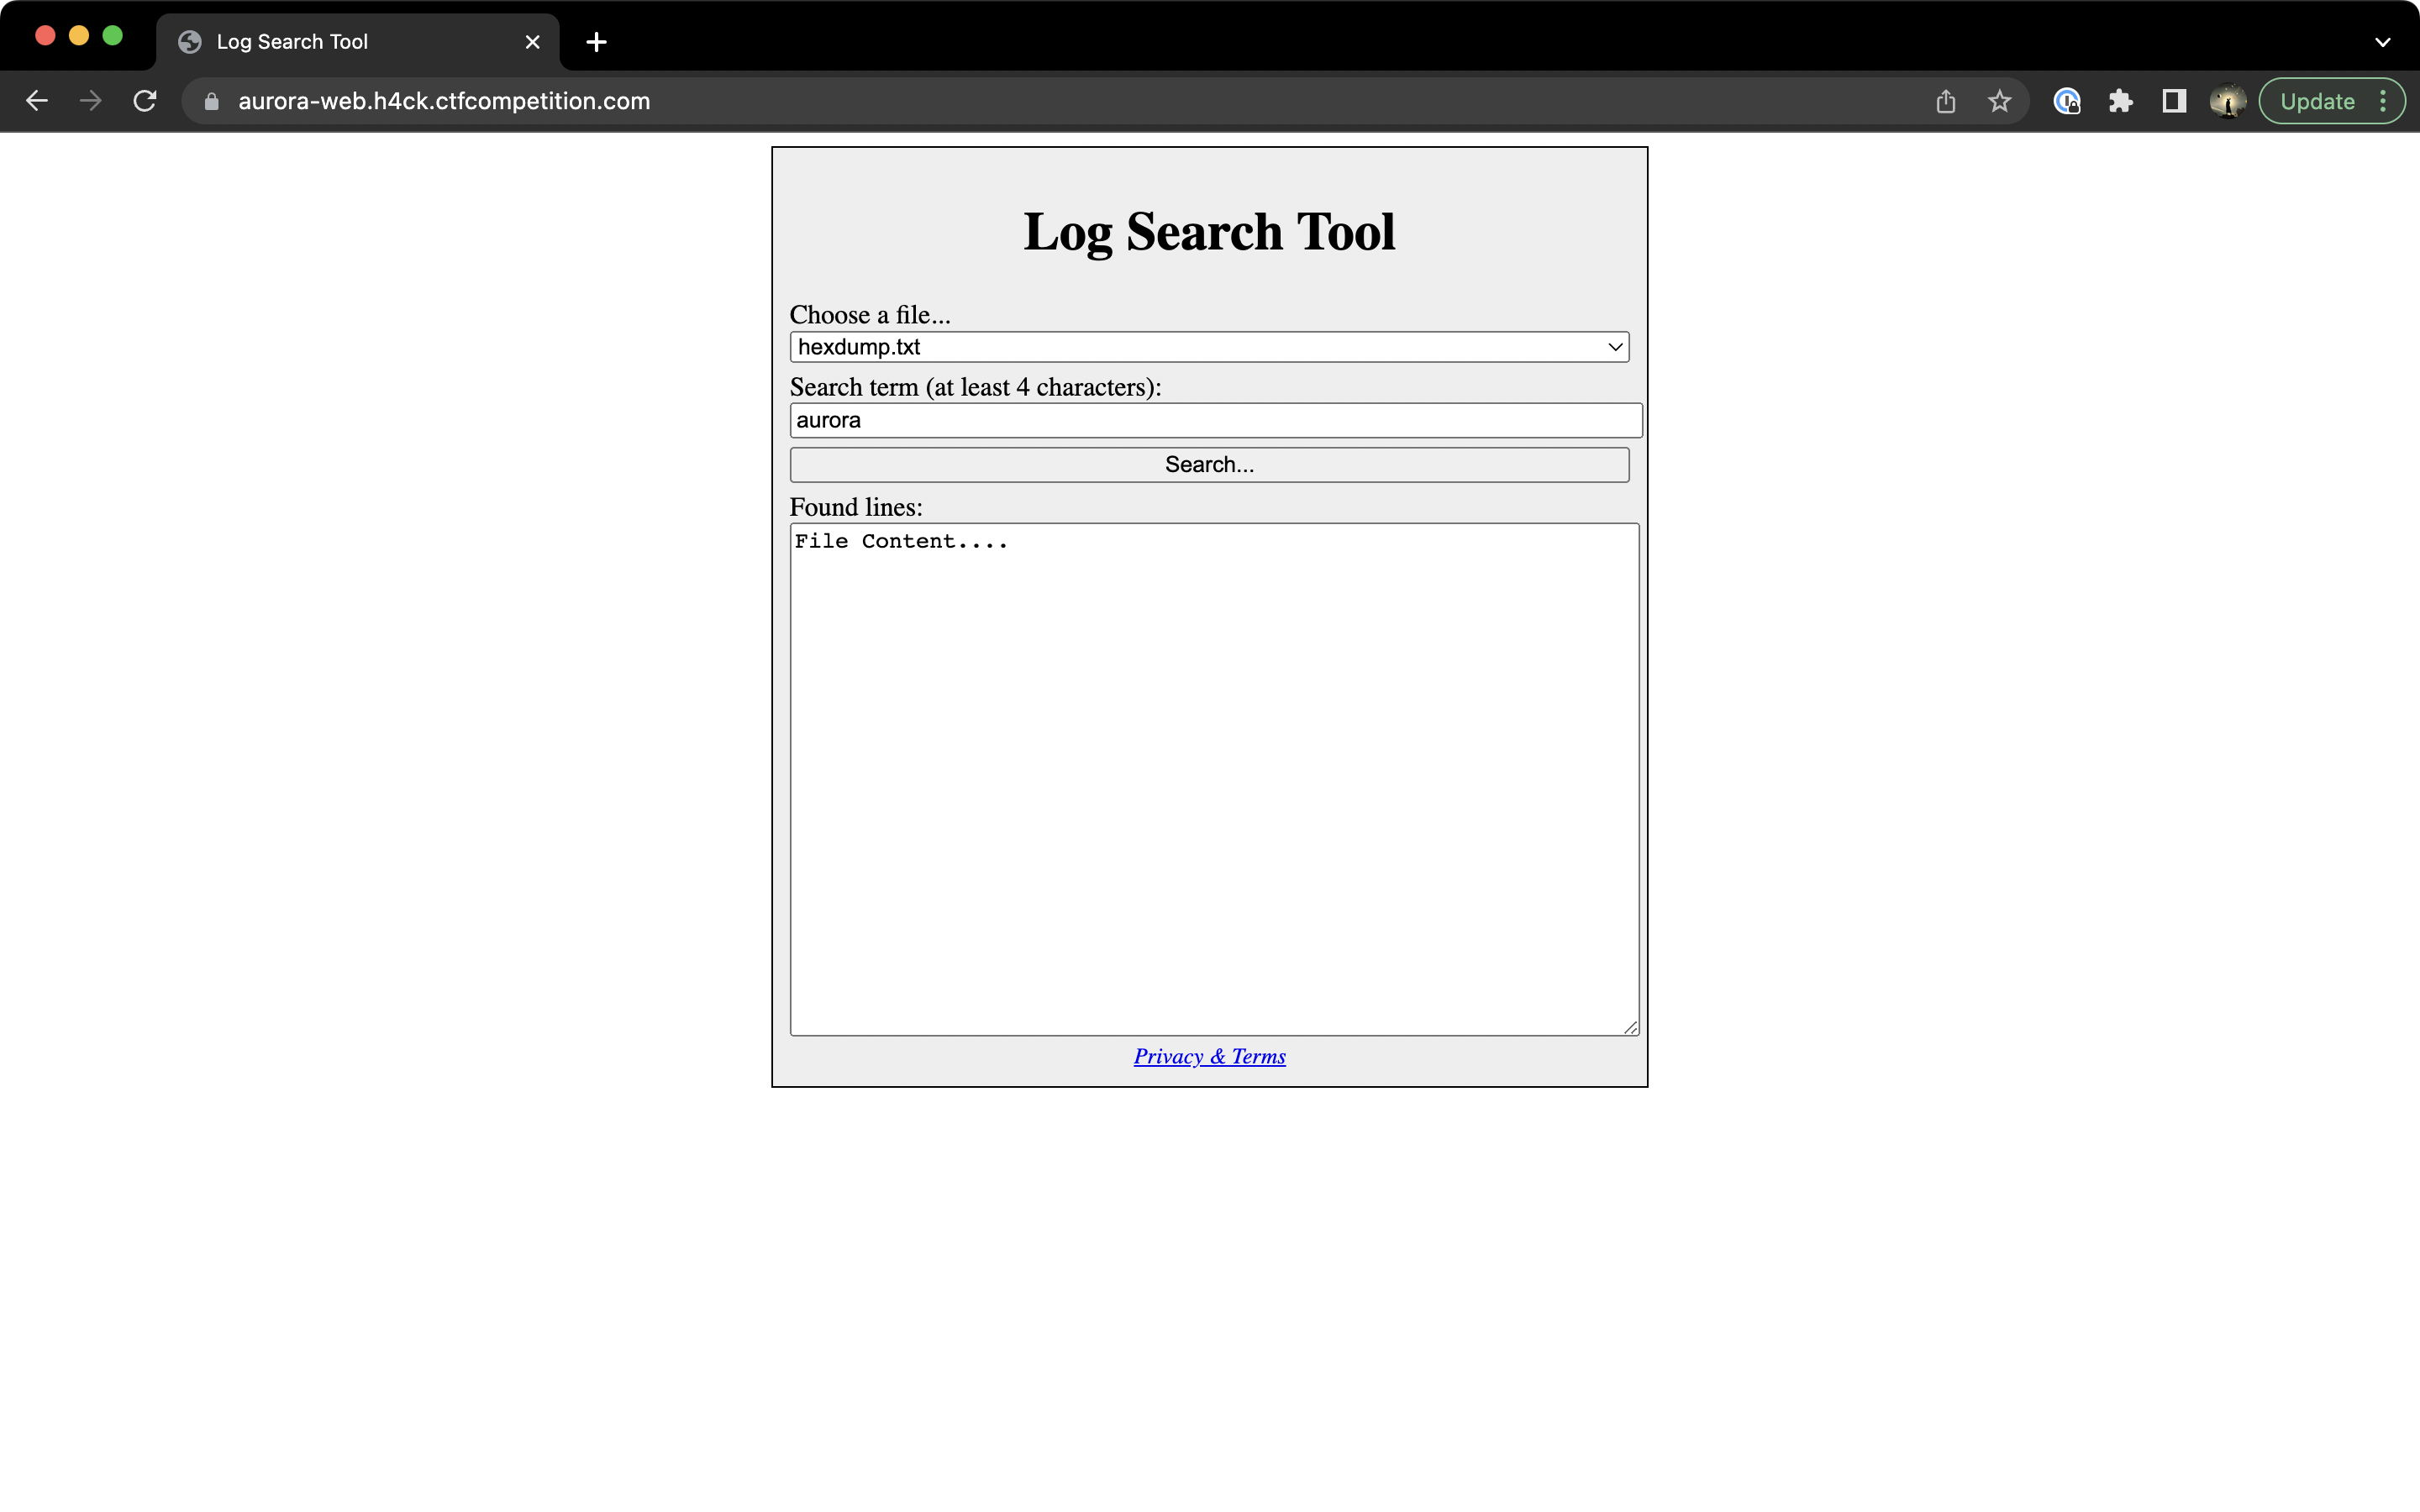 The main page of the log search tool.